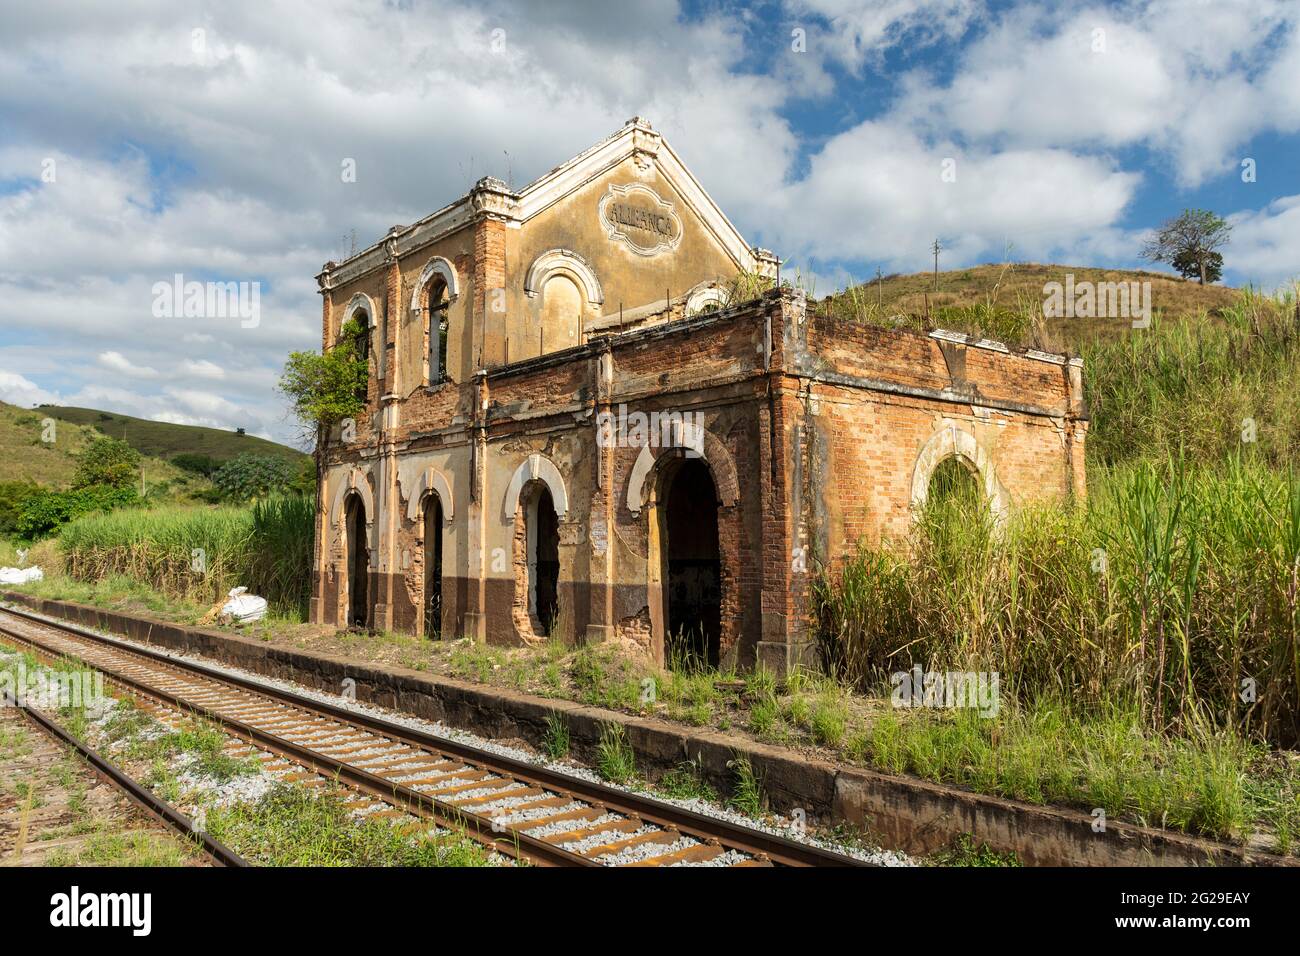 Old historic abandoned train station in the countryside Stock Photo